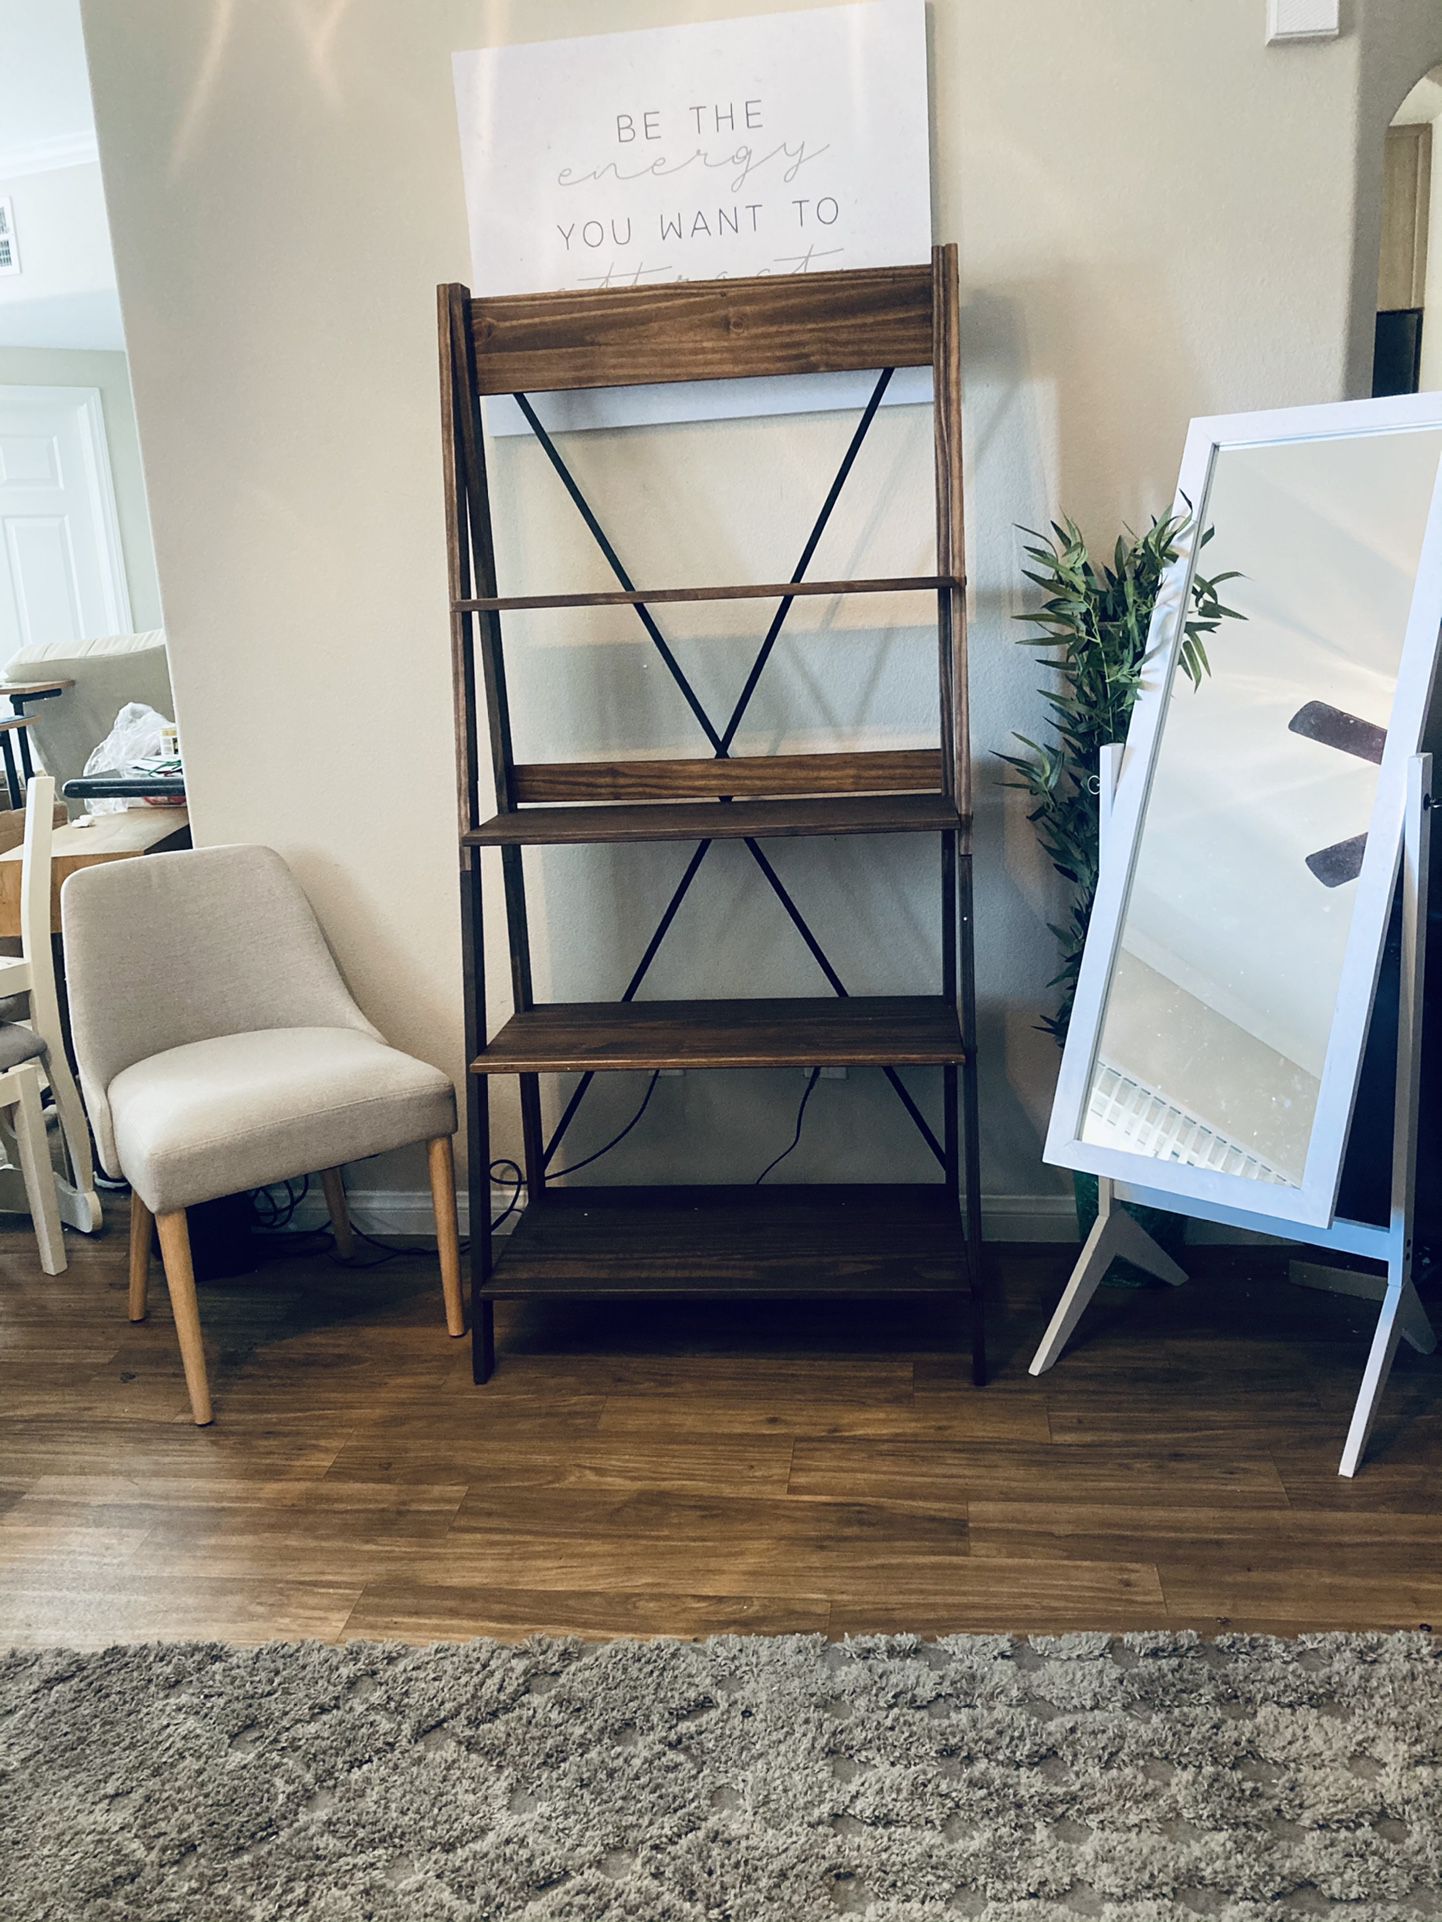 New 68" Solid Wood Ladder Bookshelf - Brown 🏷 Deal 🚚 Delivery Avail  ➡️ Details Below ⬇️